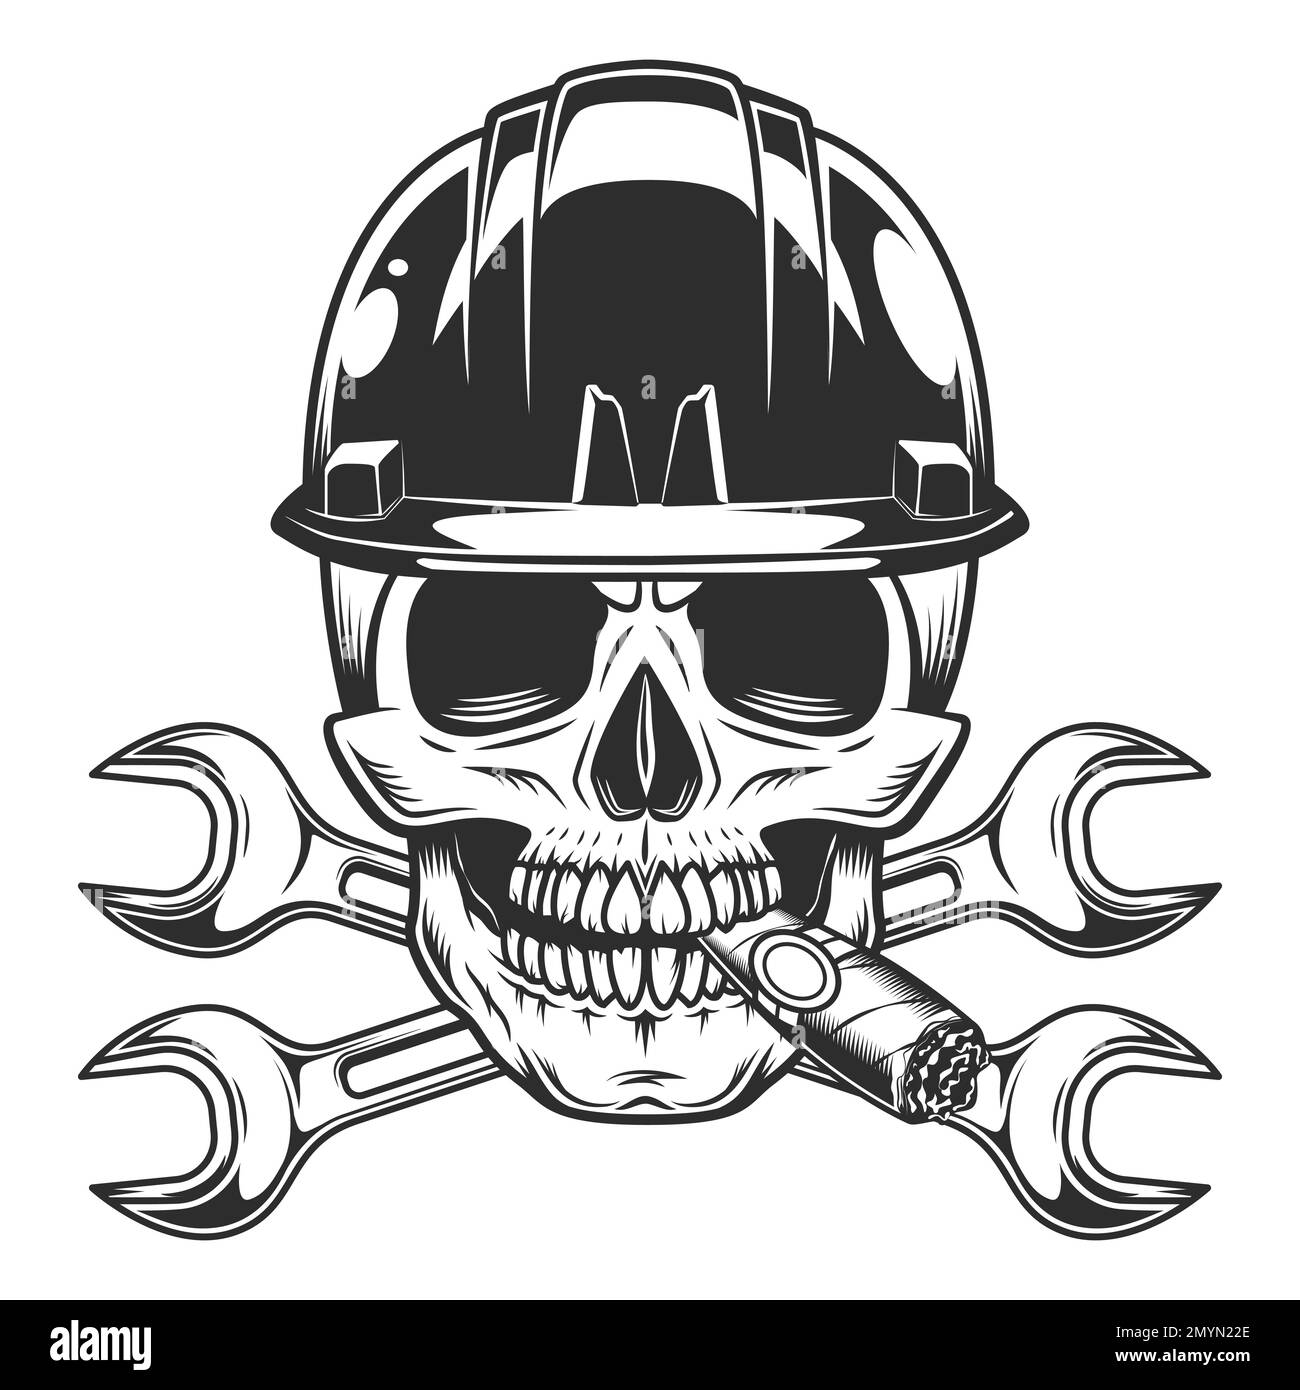 Vintage skull smoking cigar or cigarette smoke in hard hat helmet with body shop service car and truck mechanic repair tool crossed wrench Stock Vector